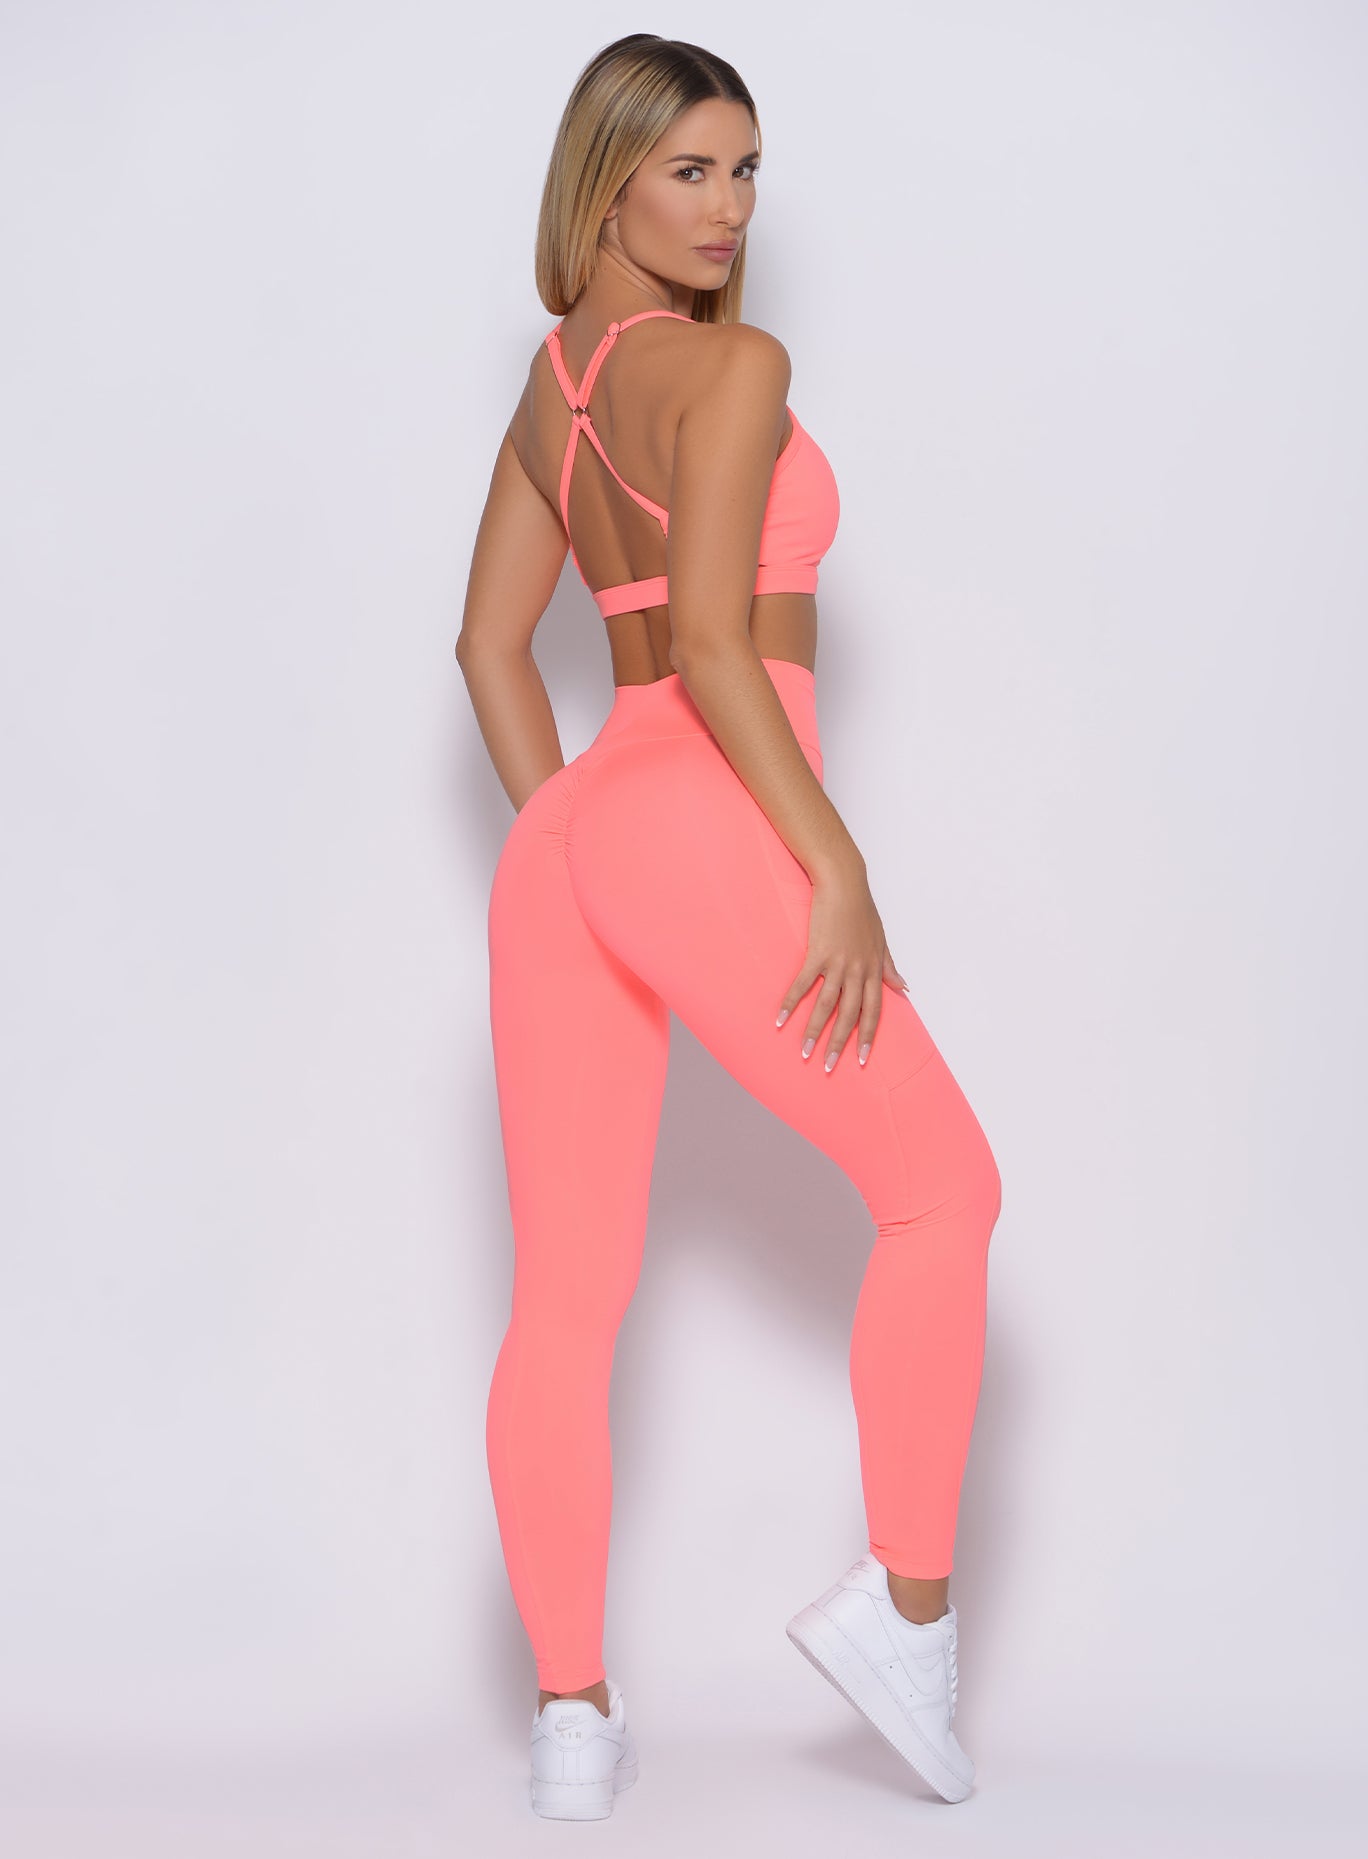 Right side profile view of a model angled right wearing our pumped sports bra in wild peach color and a matching leggings